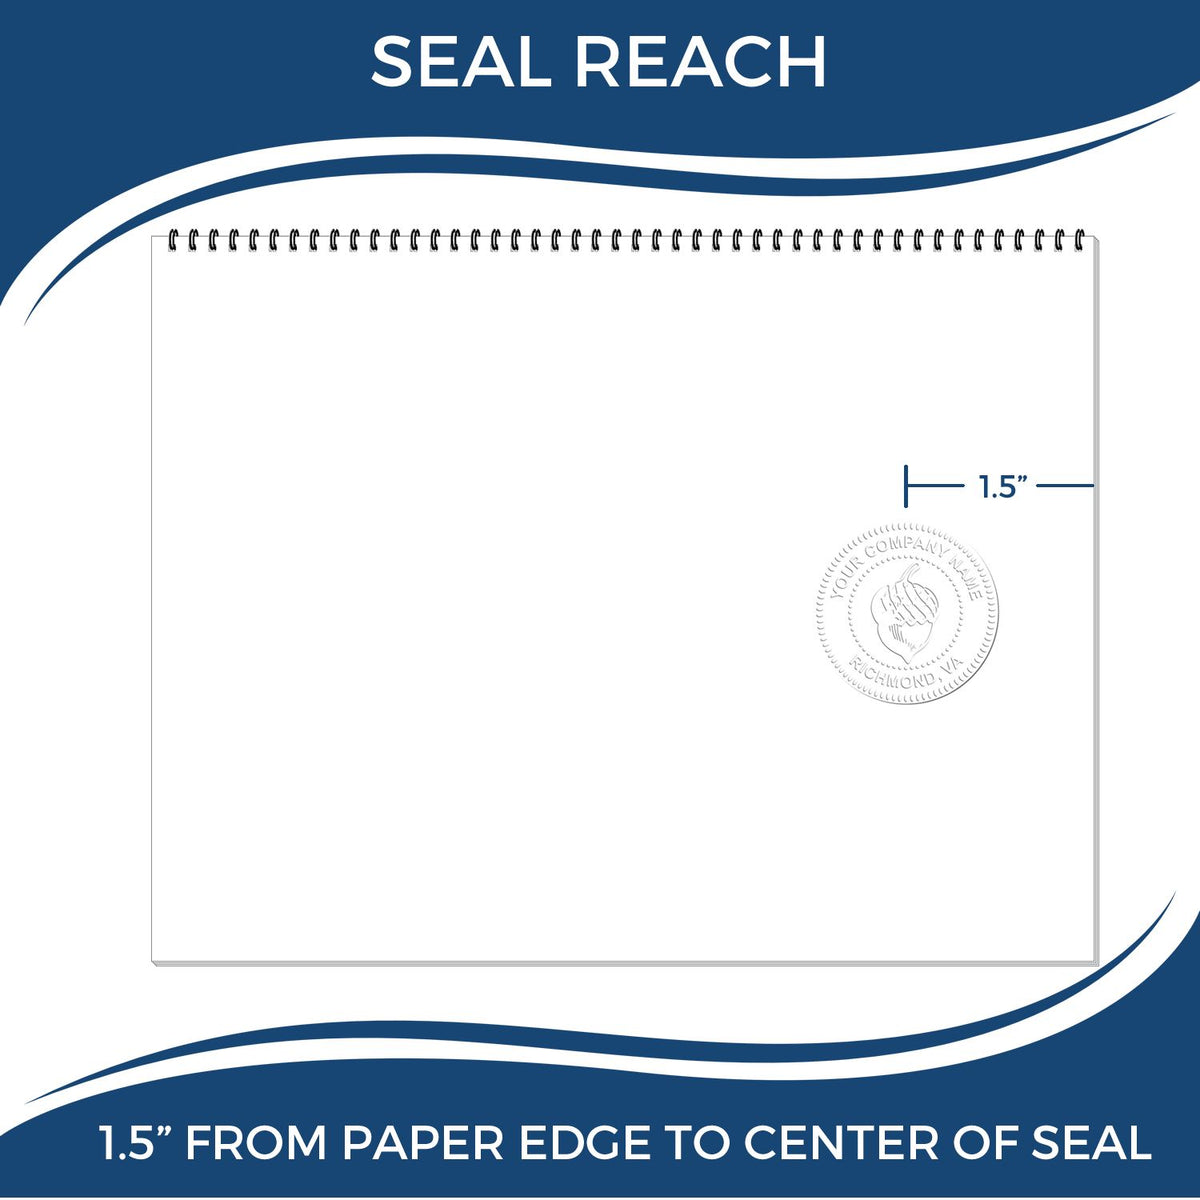 An infographic showing the seal reach which is represented by a ruler and a miniature seal image of the Utah Engineer Desk Seal